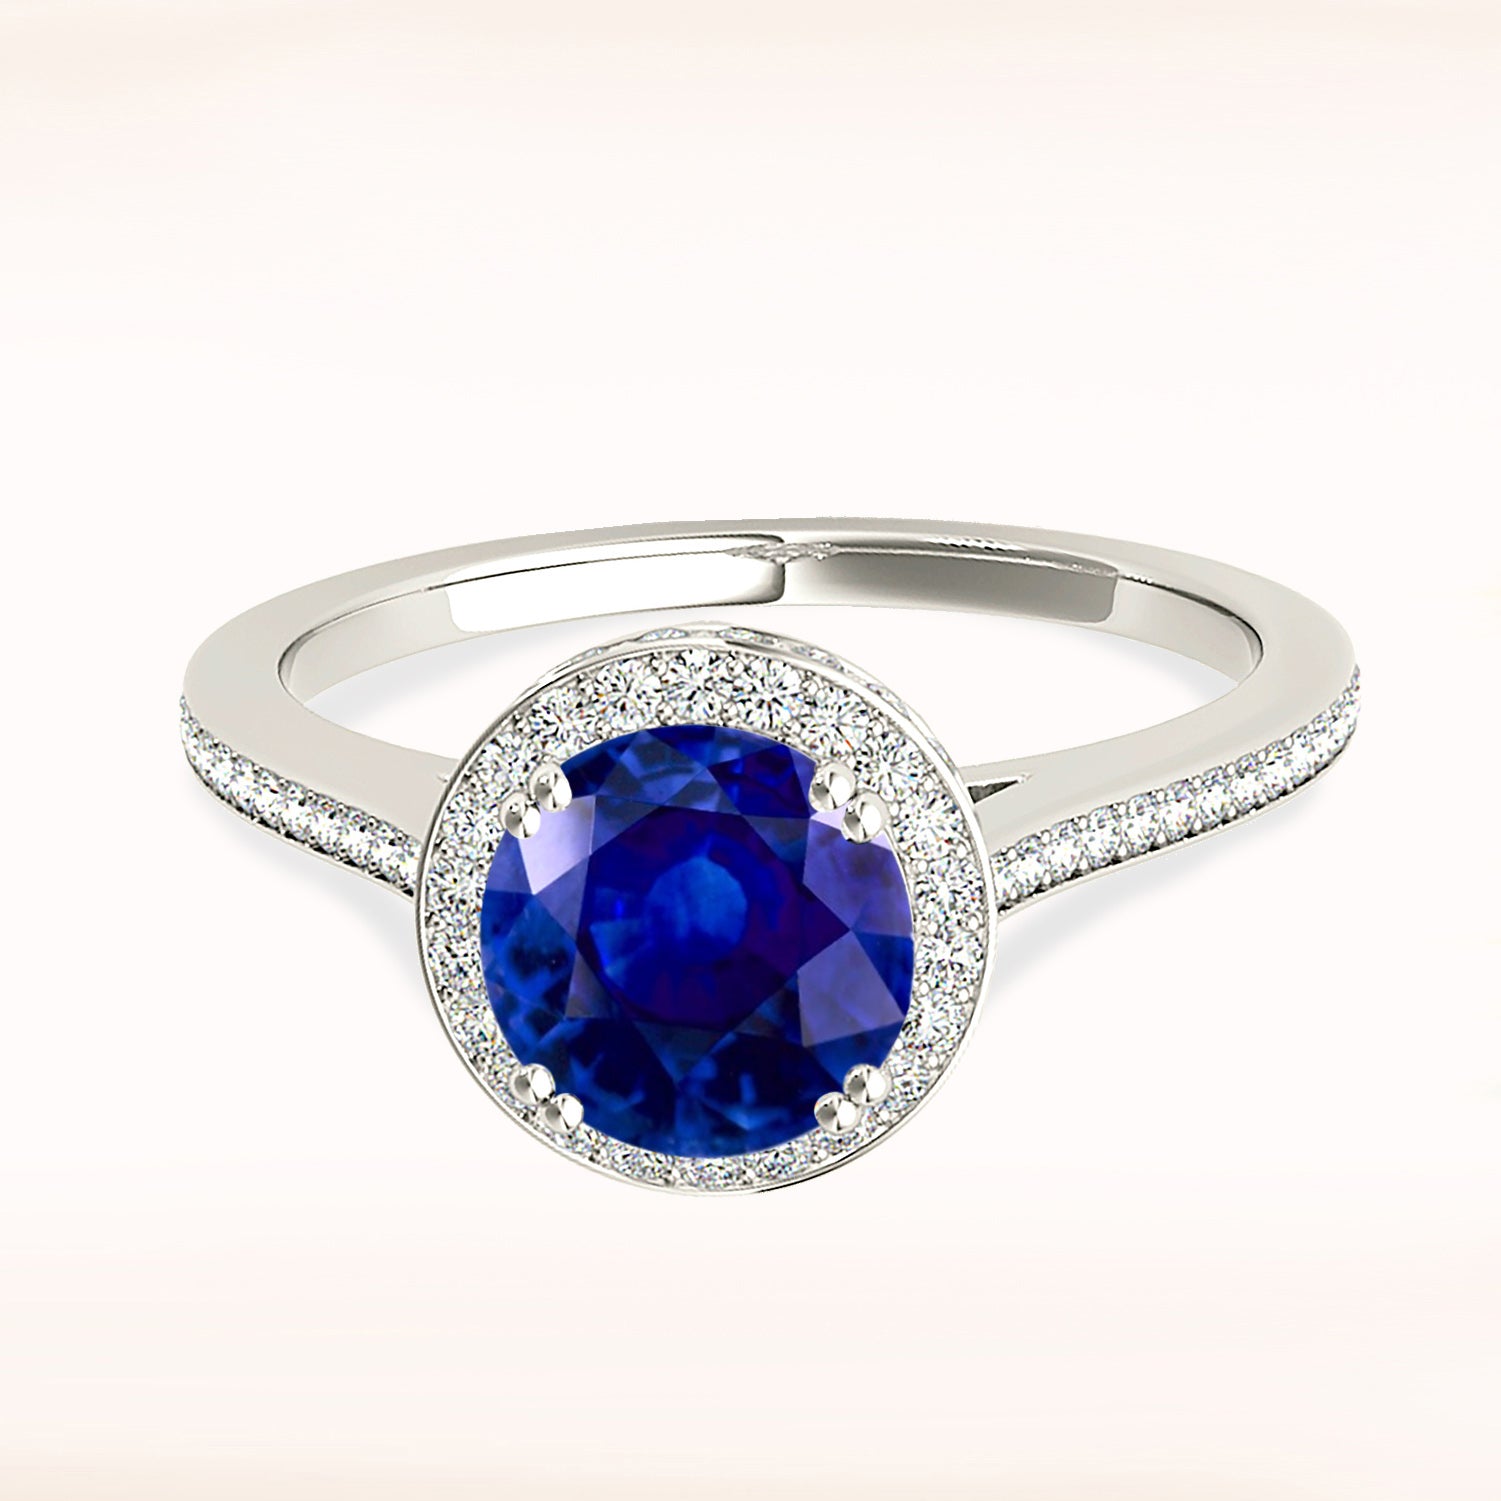 2.41 ct. Genuine Blue Sapphire Halo Ring with 0.50 ctw. Side Diamonds-in 14K/18K White, Yellow, Rose Gold and Platinum - Christmas Jewelry Gift -VIRABYANI